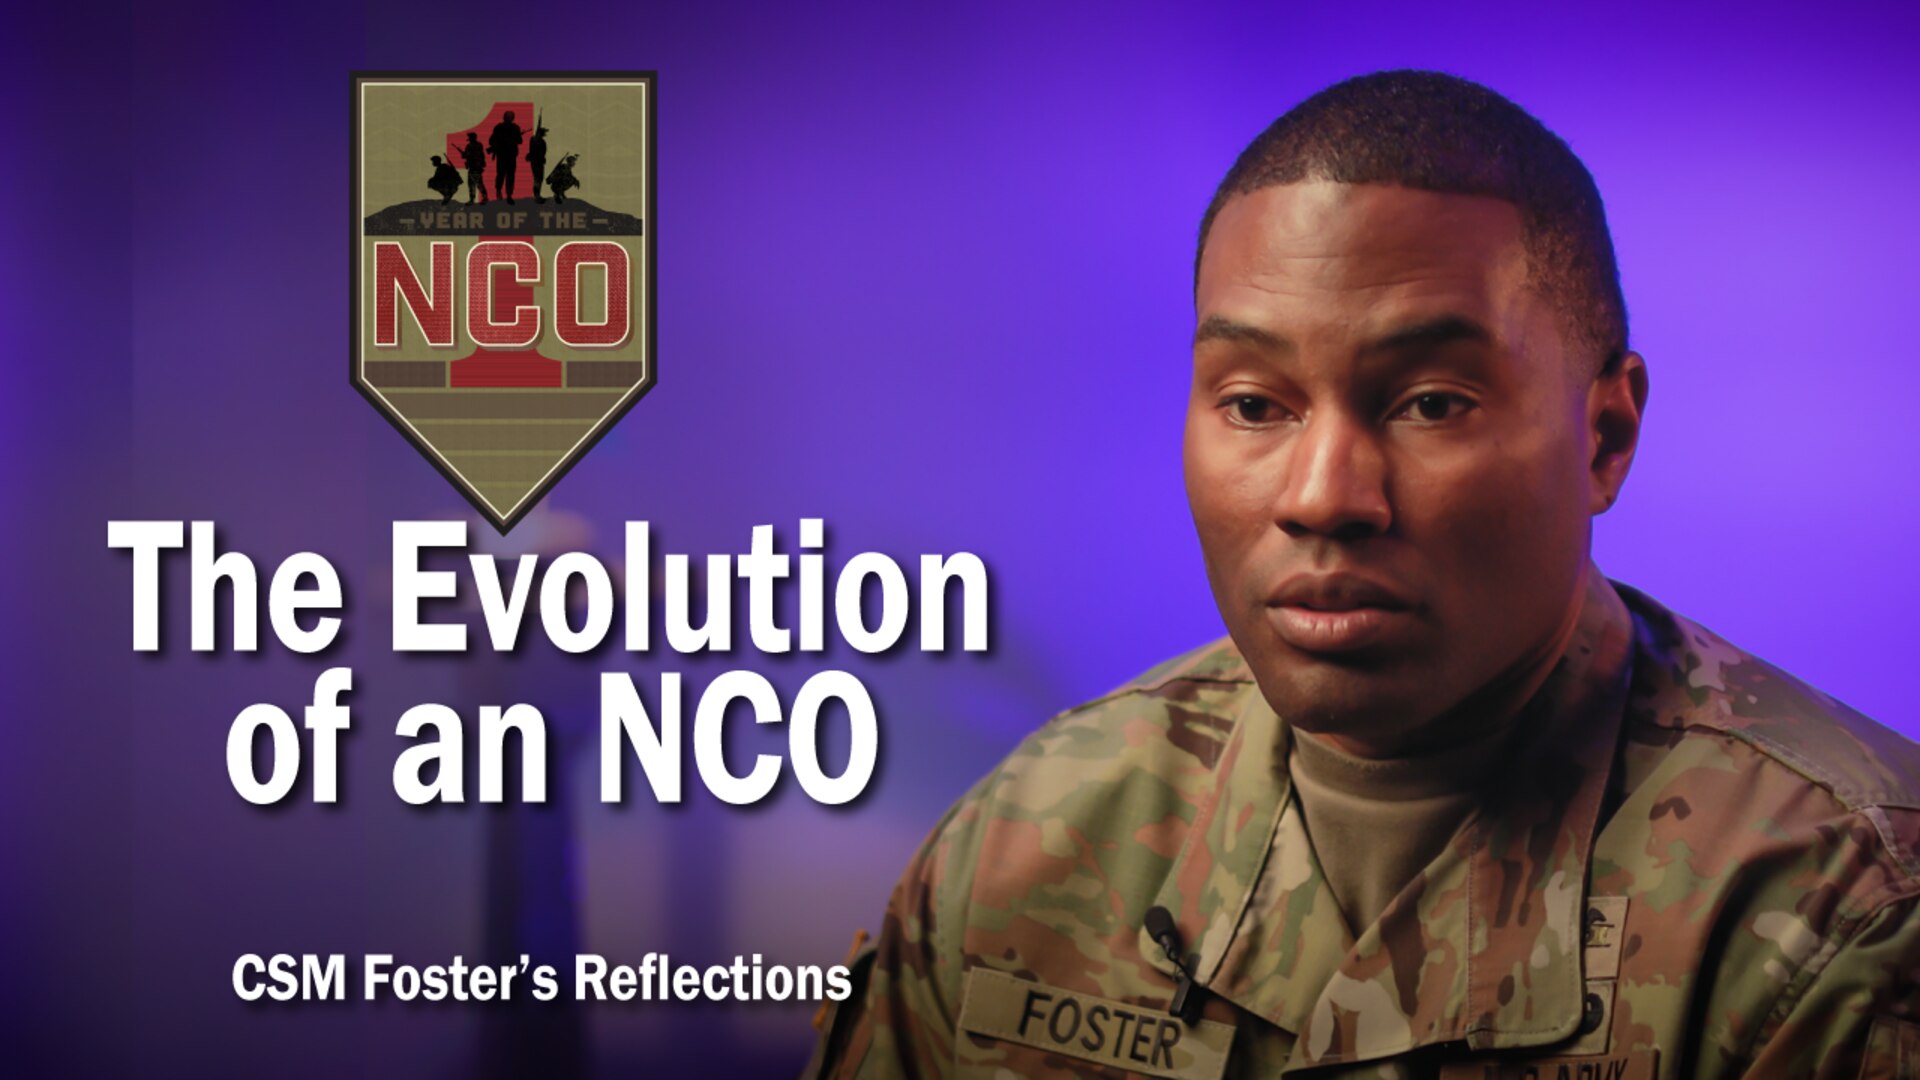 The Evolution of an NCO